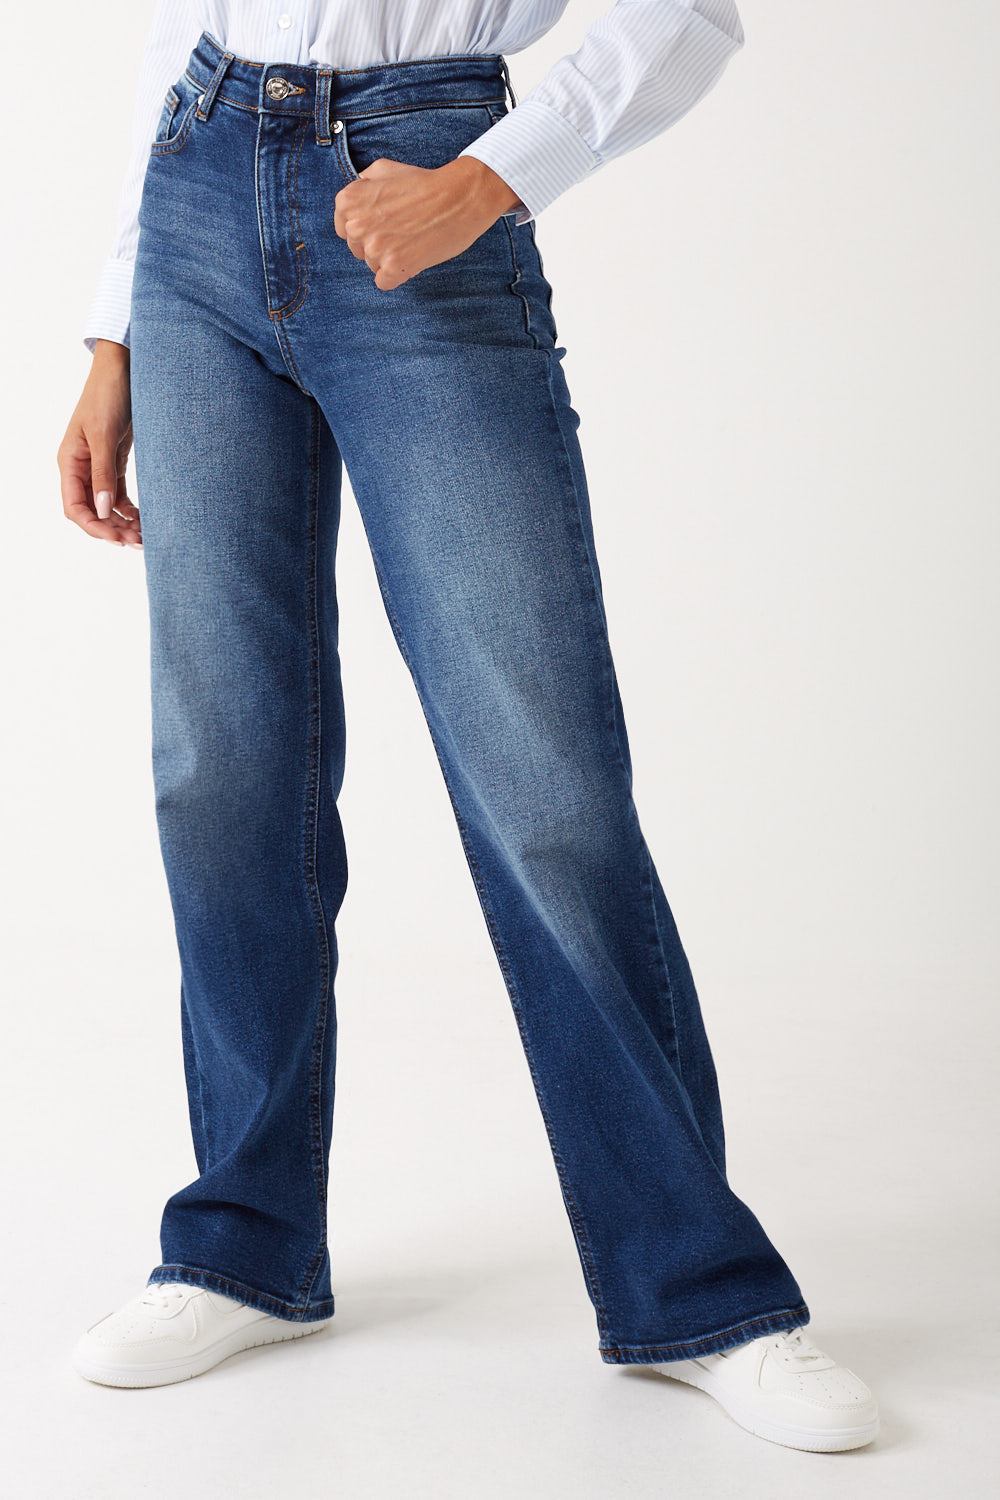 Only Juicy High Waisted Wide Leg Jeans in Dark Blue Denim